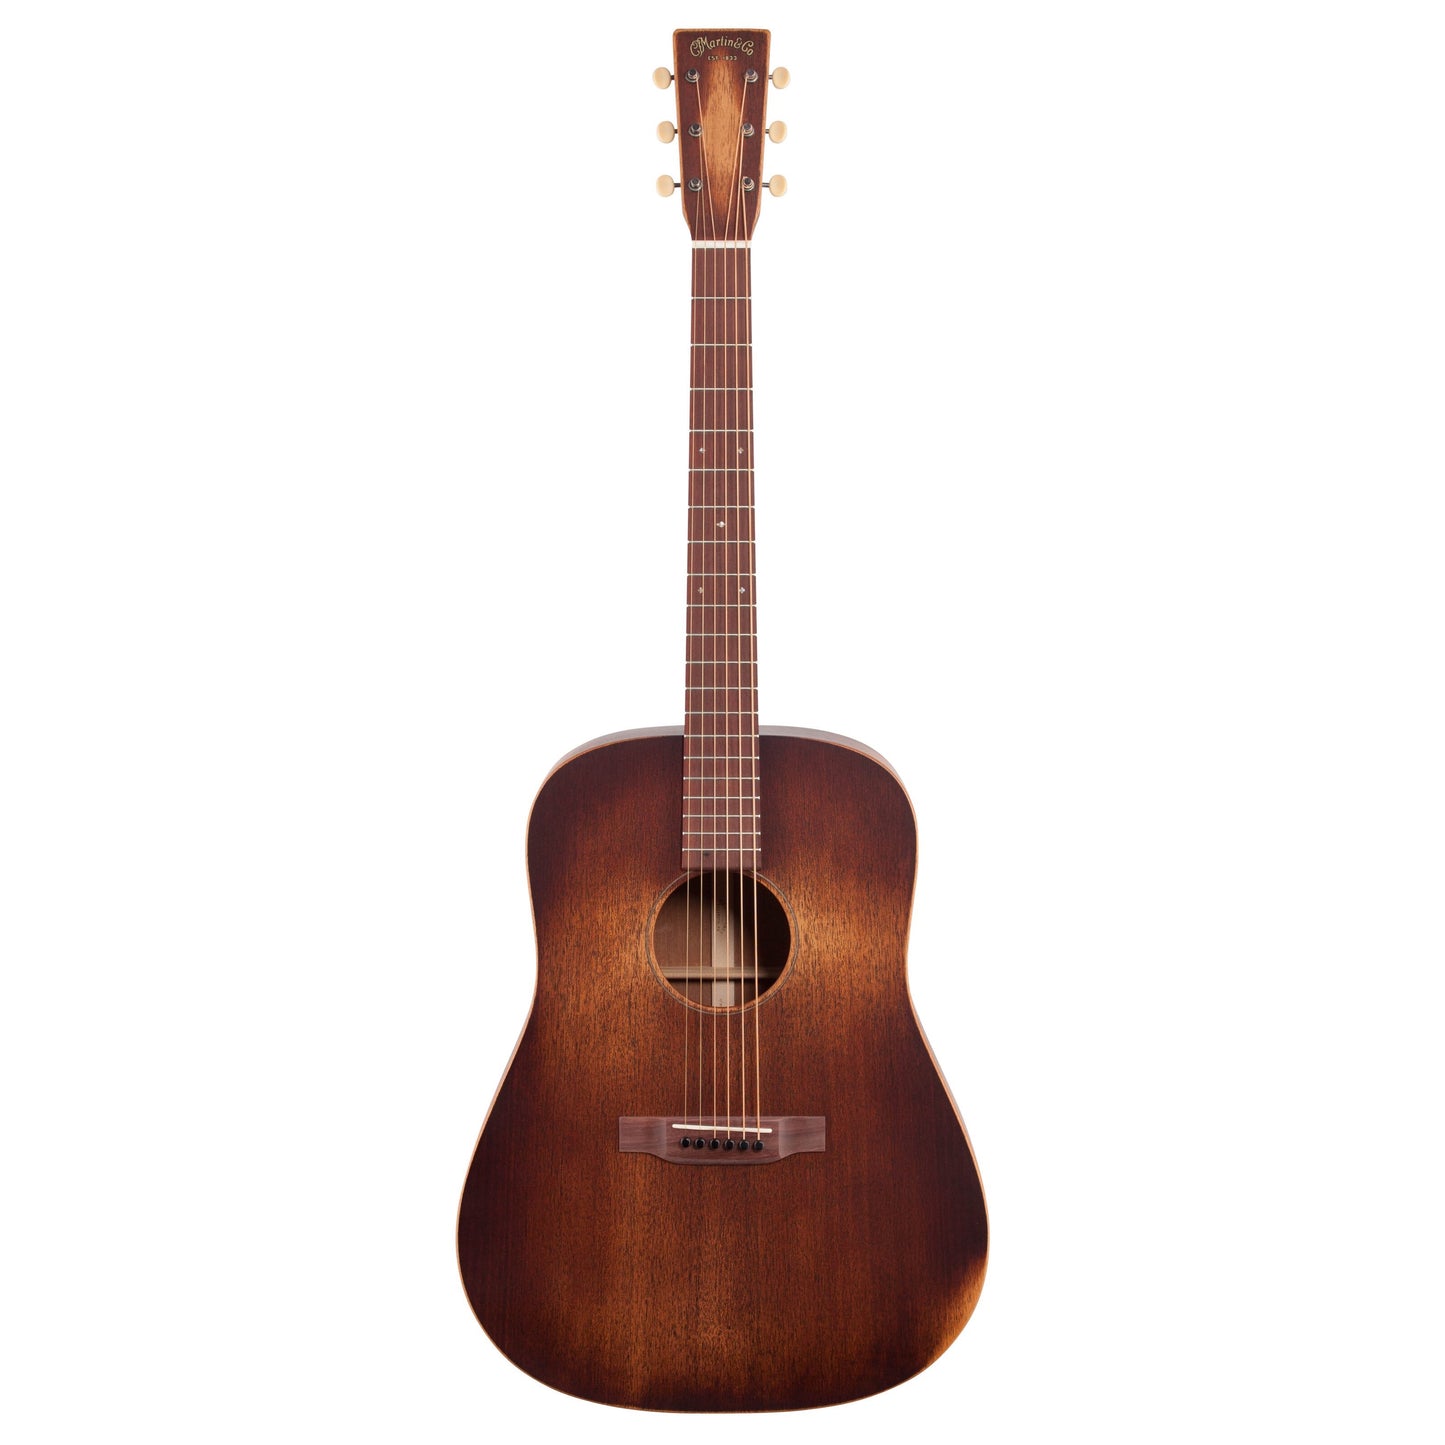 Martin D-15M StreetMaster Acoustic Guitar, Left Handed (with Gig Bag), Mahogany Burst